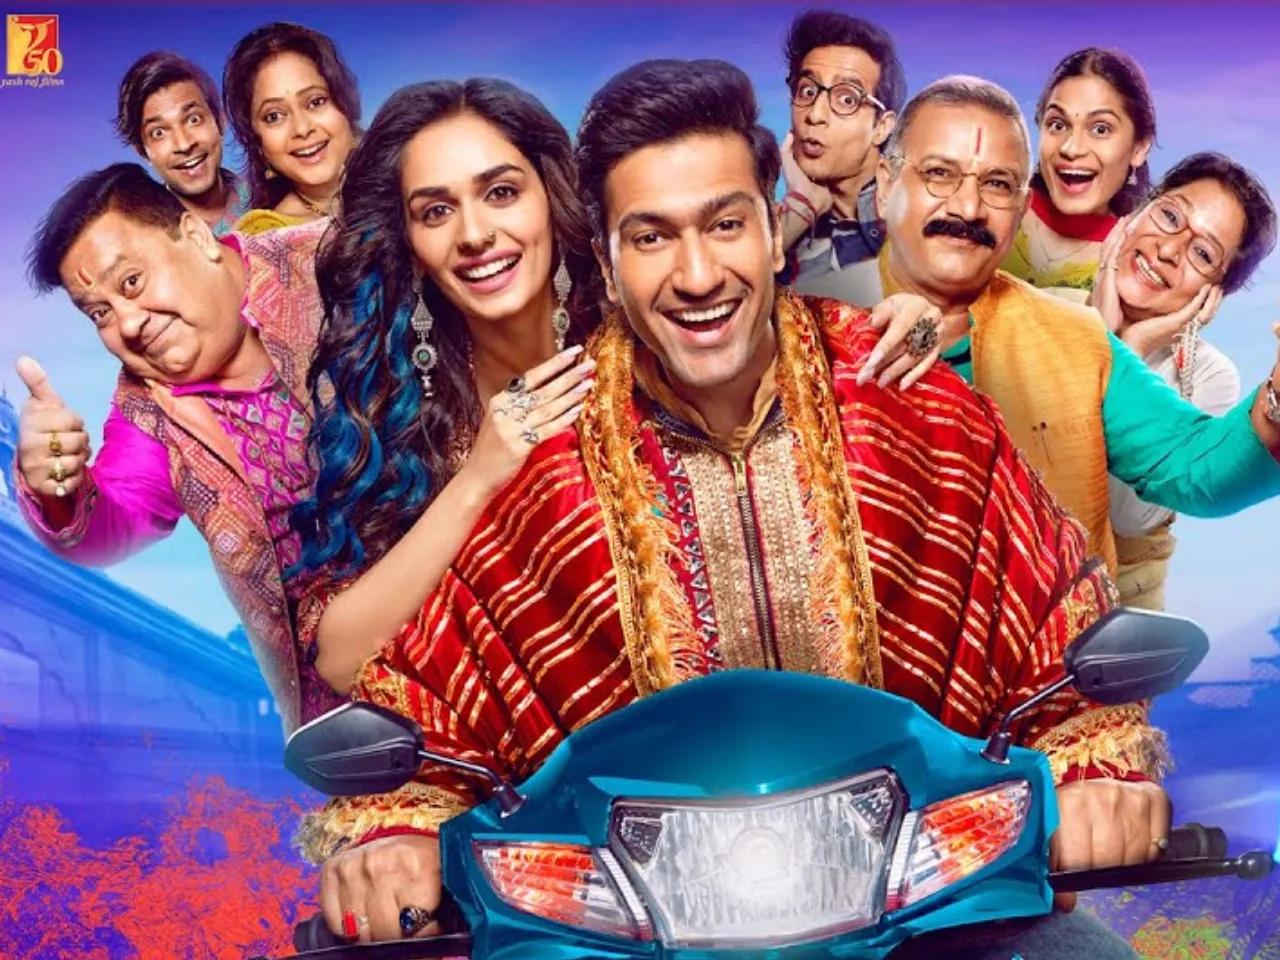 The Great Indian Family garners mixed reviews from the Janta